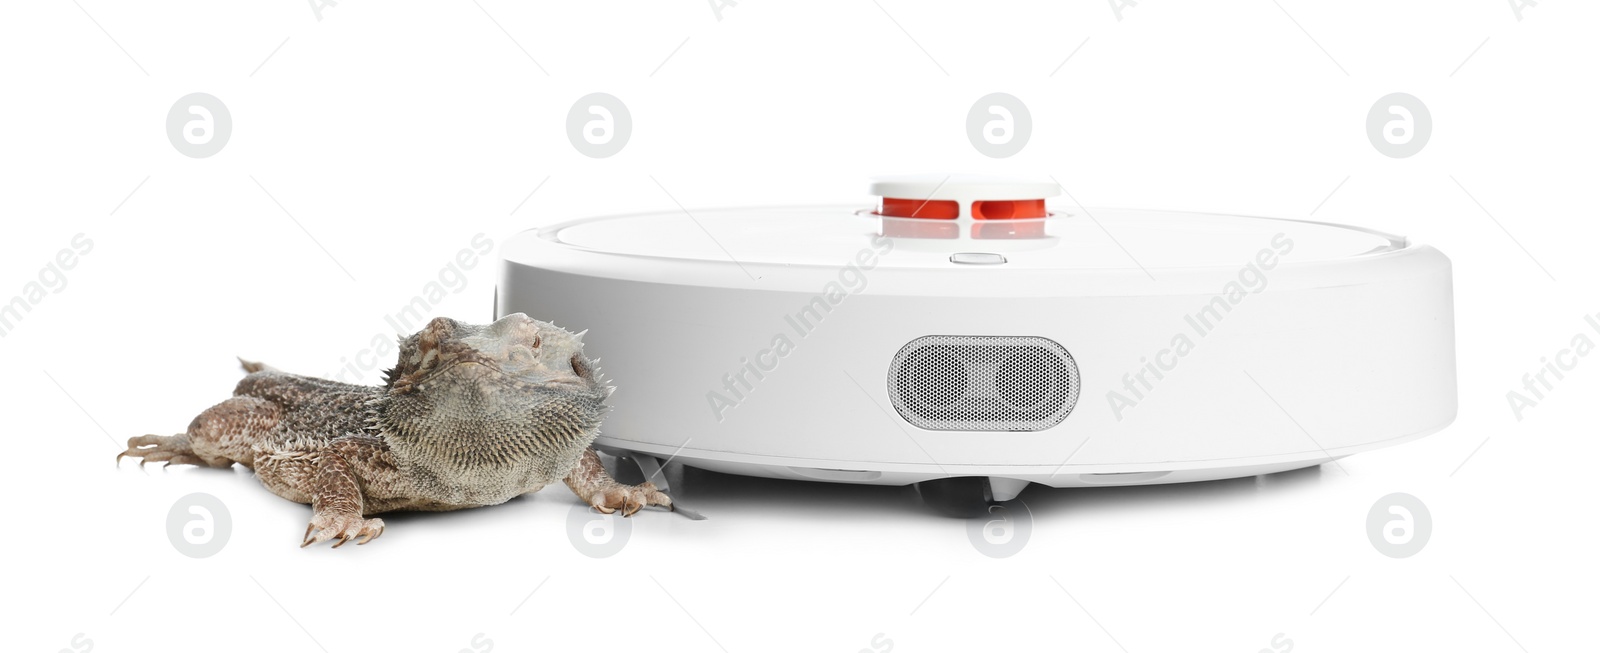 Photo of Robotic vacuum cleaner and bearded dragon lizard on white background